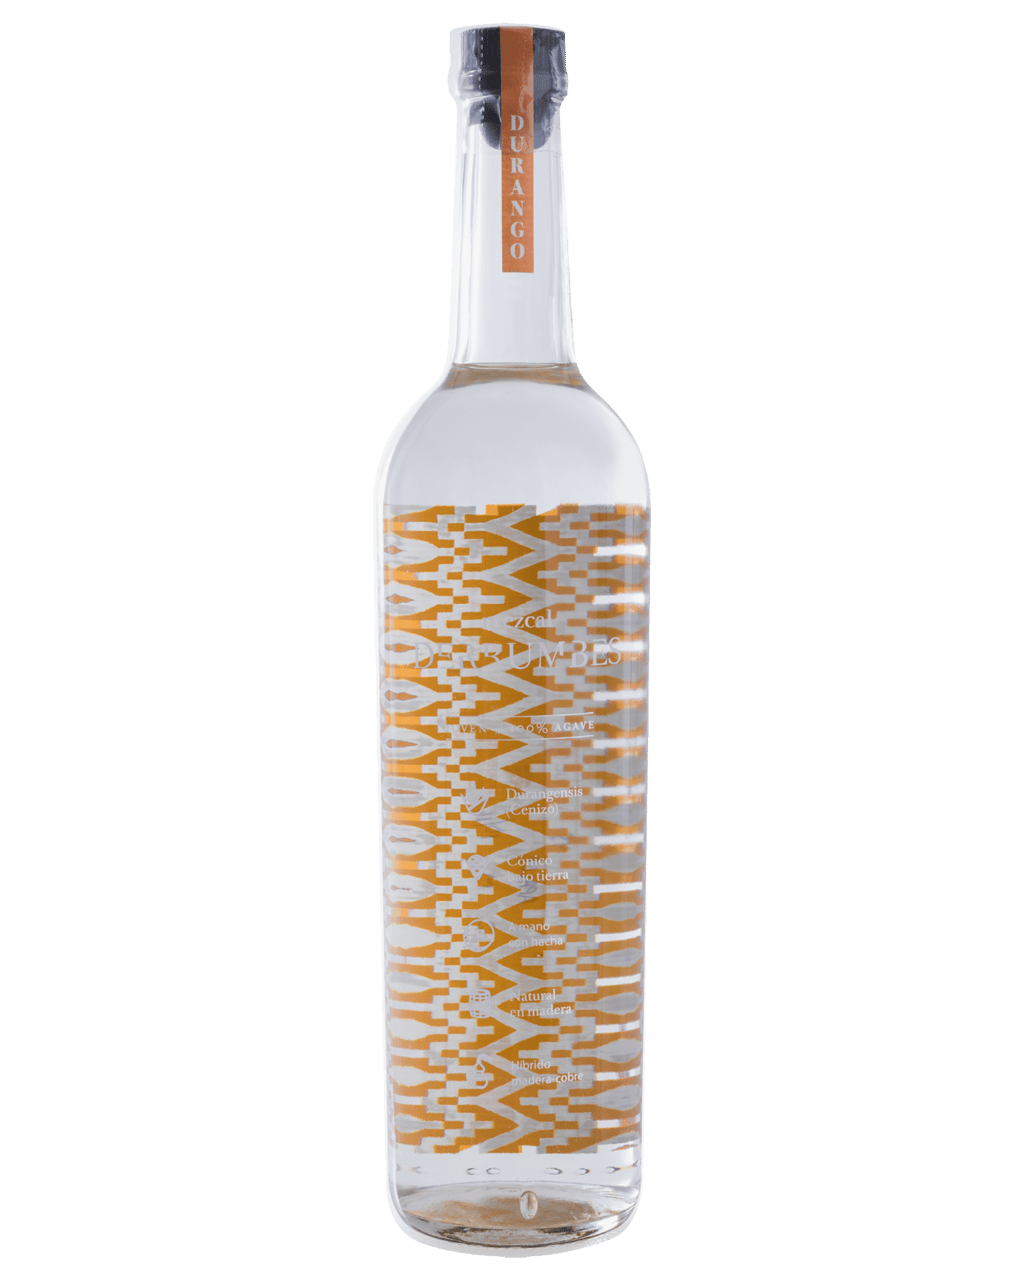 Buy Derrumbes Mezcal Durango 700ml Online or Near You in Australia [with  Same Day Delivery* & Best Offers] - Dan Murphy's